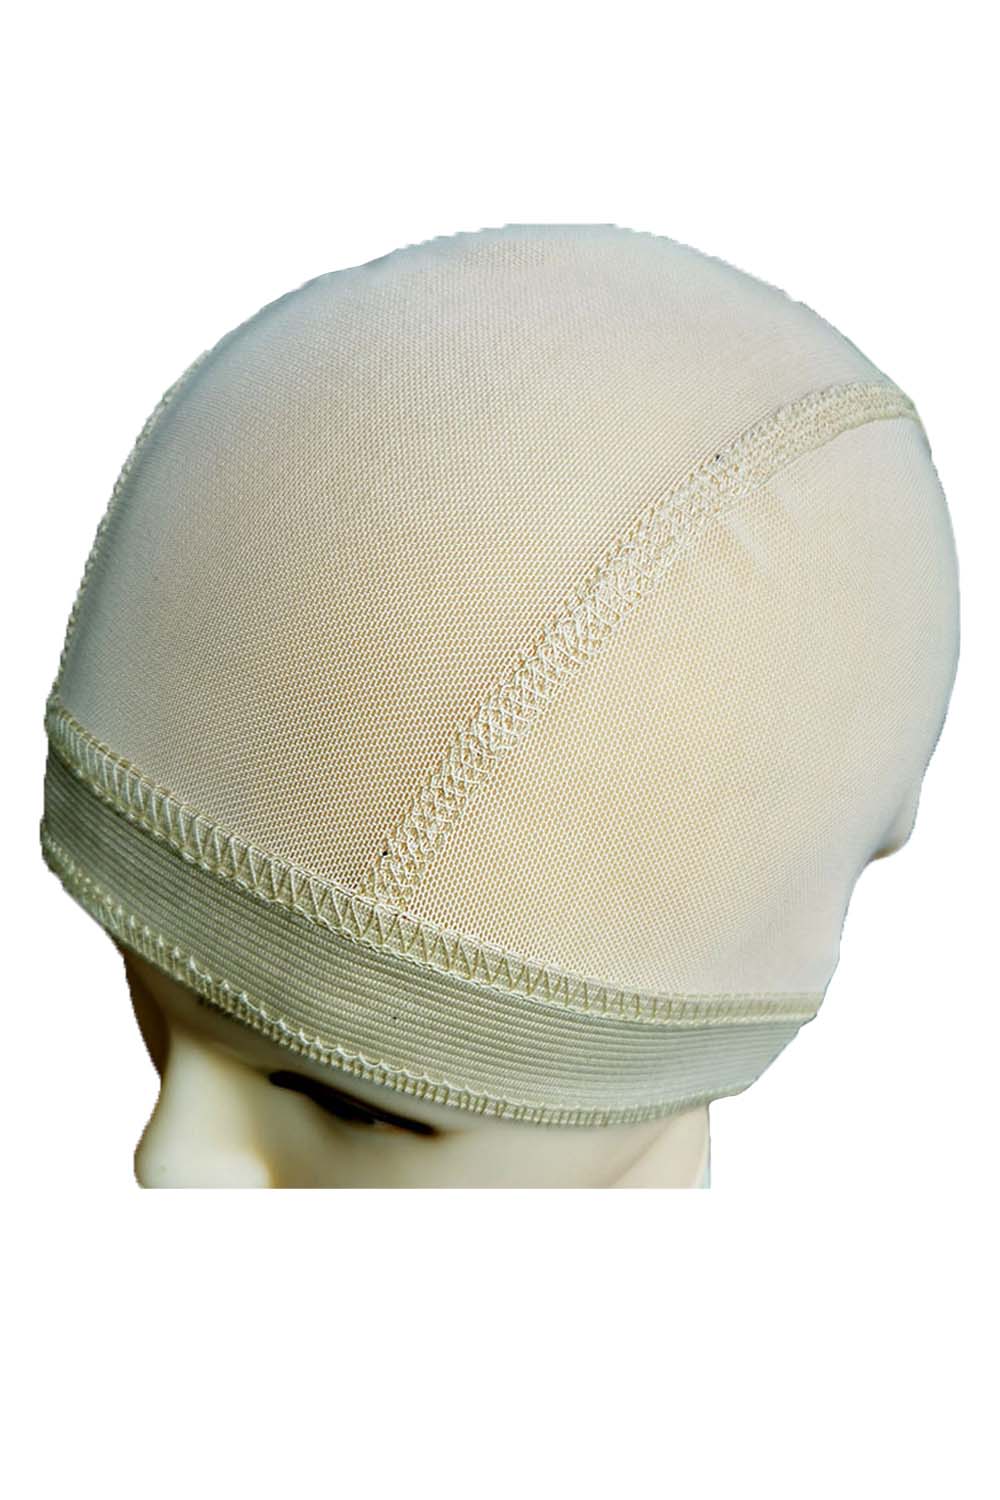 thin-beige-ventilated-dome-cap-diy-making-your-own-wig